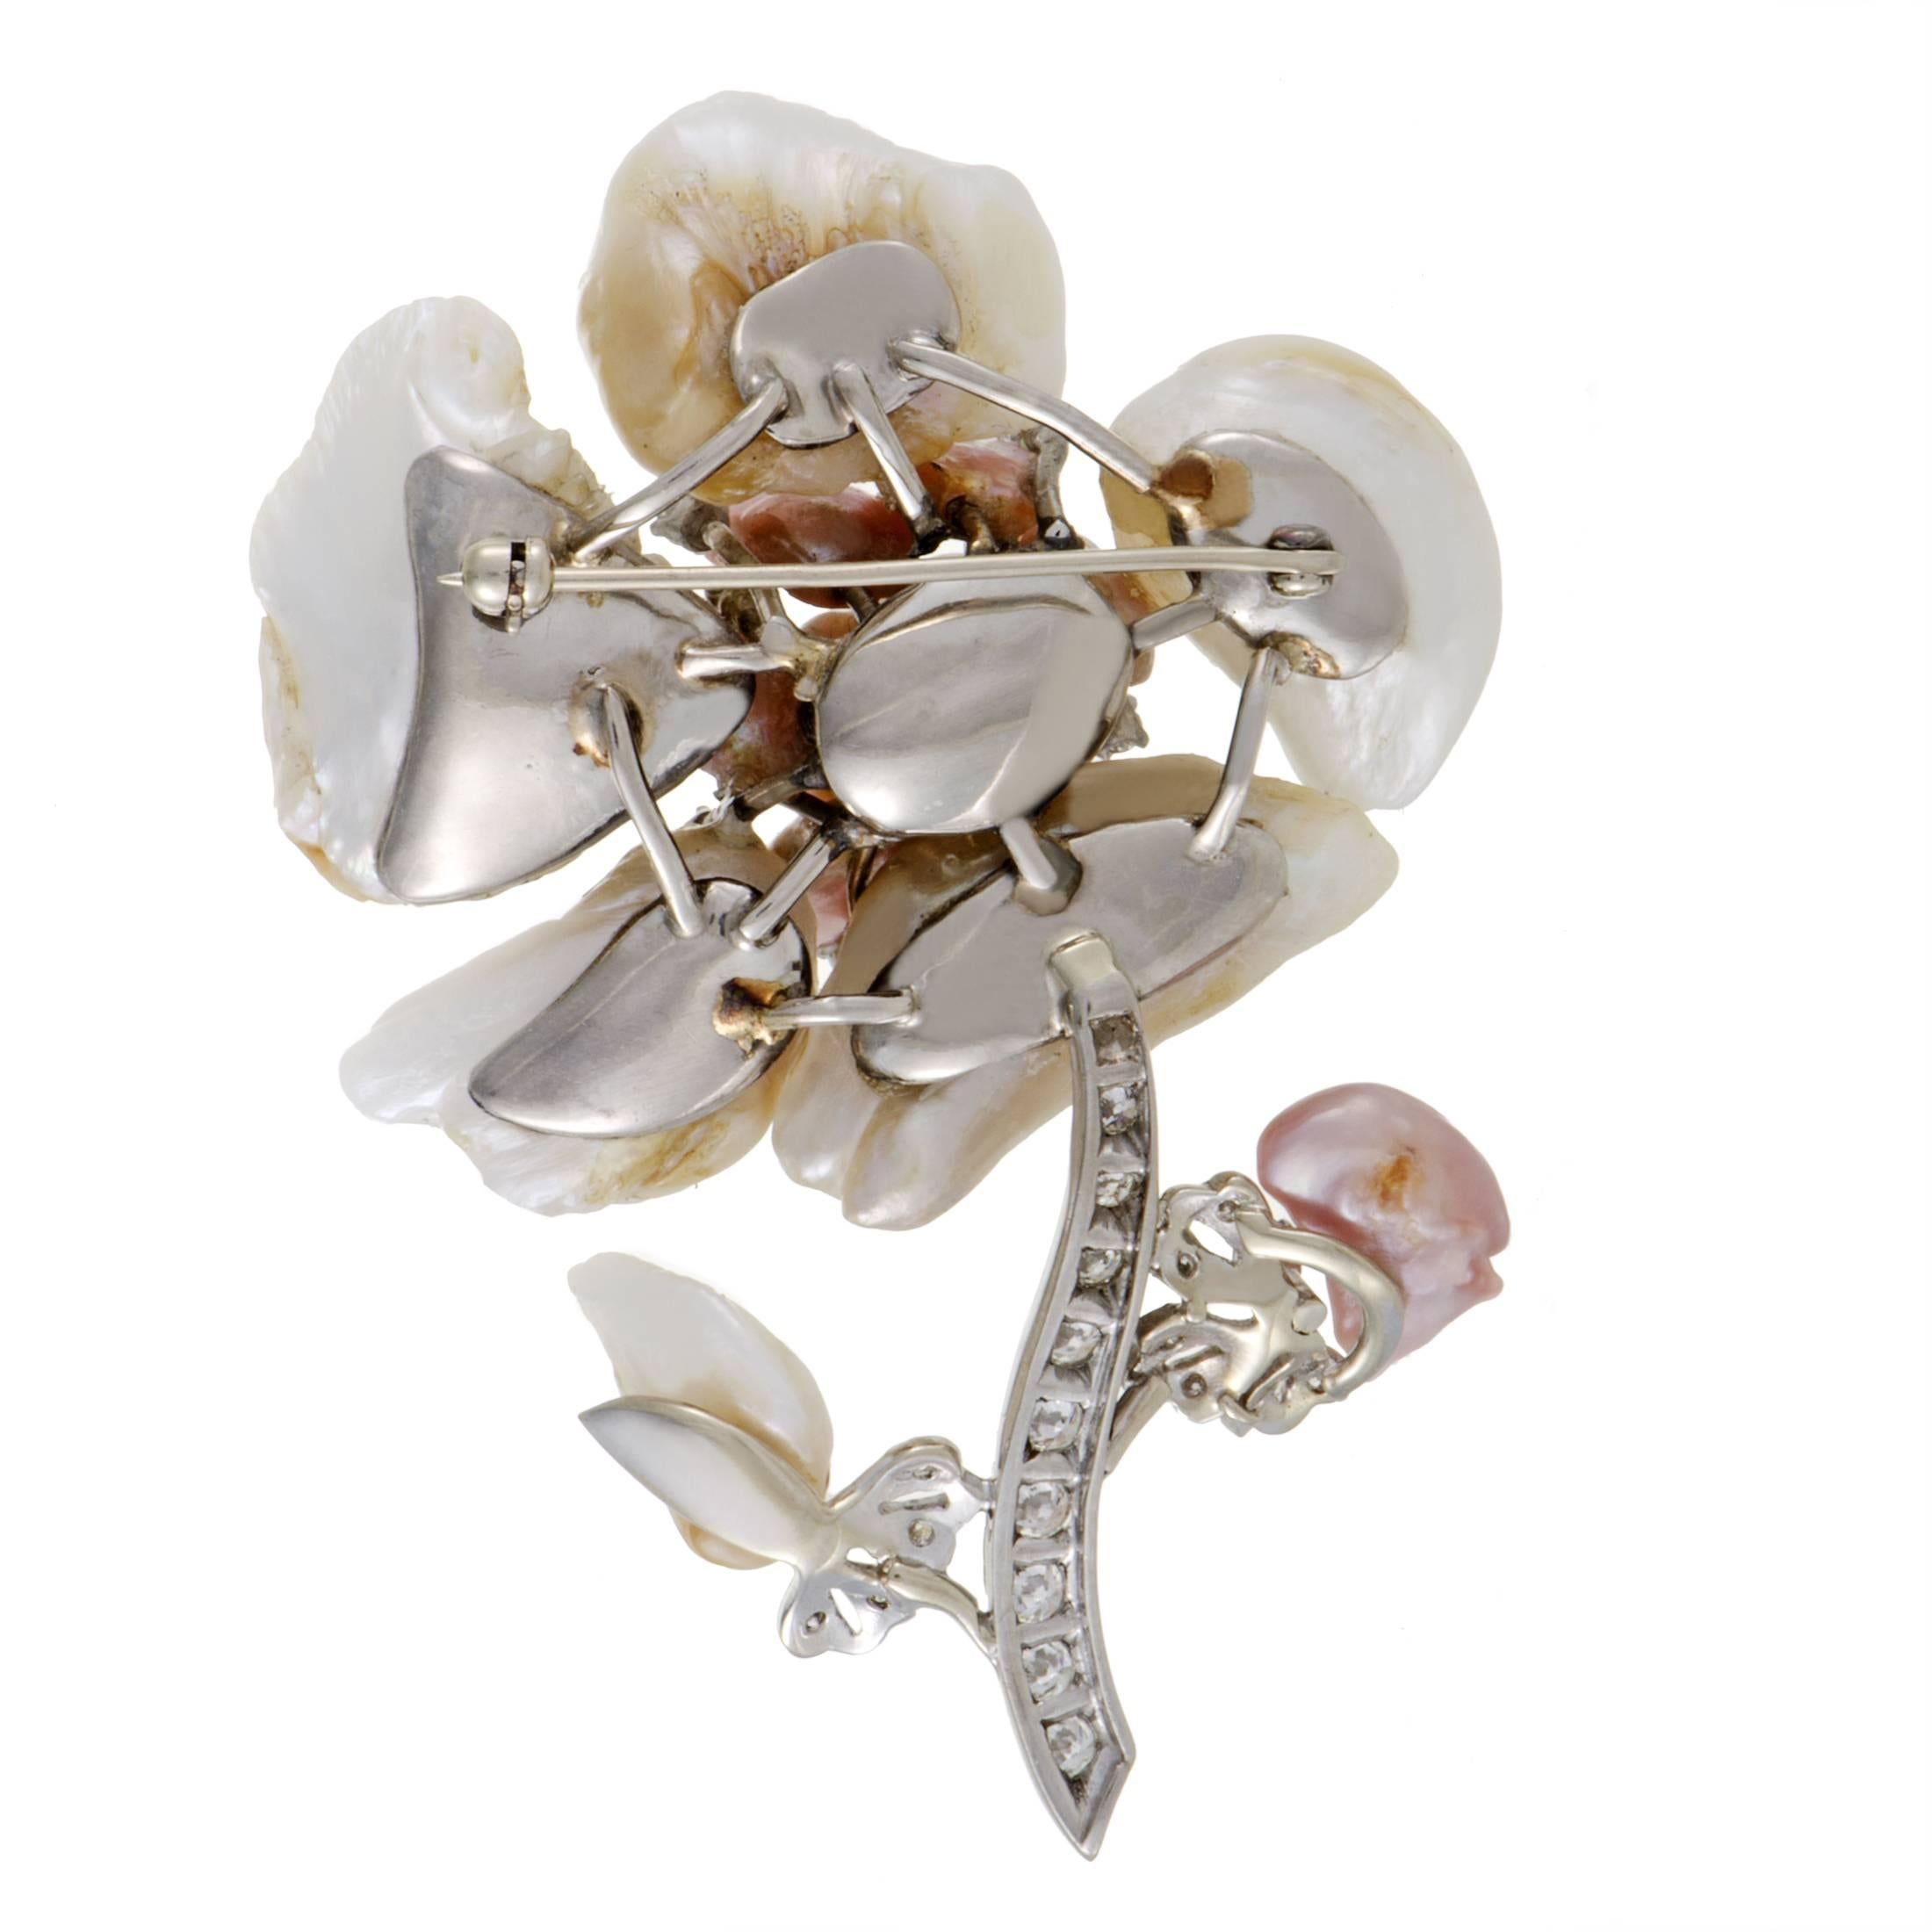 While the spellbinding amorphous baroque pearls create a wonderfully realistic depiction of a flower, splendid 18K white gold and sparkling diamonds amounting approximately to 1.00 carat complete this delightful brooch in harmonious fashion.